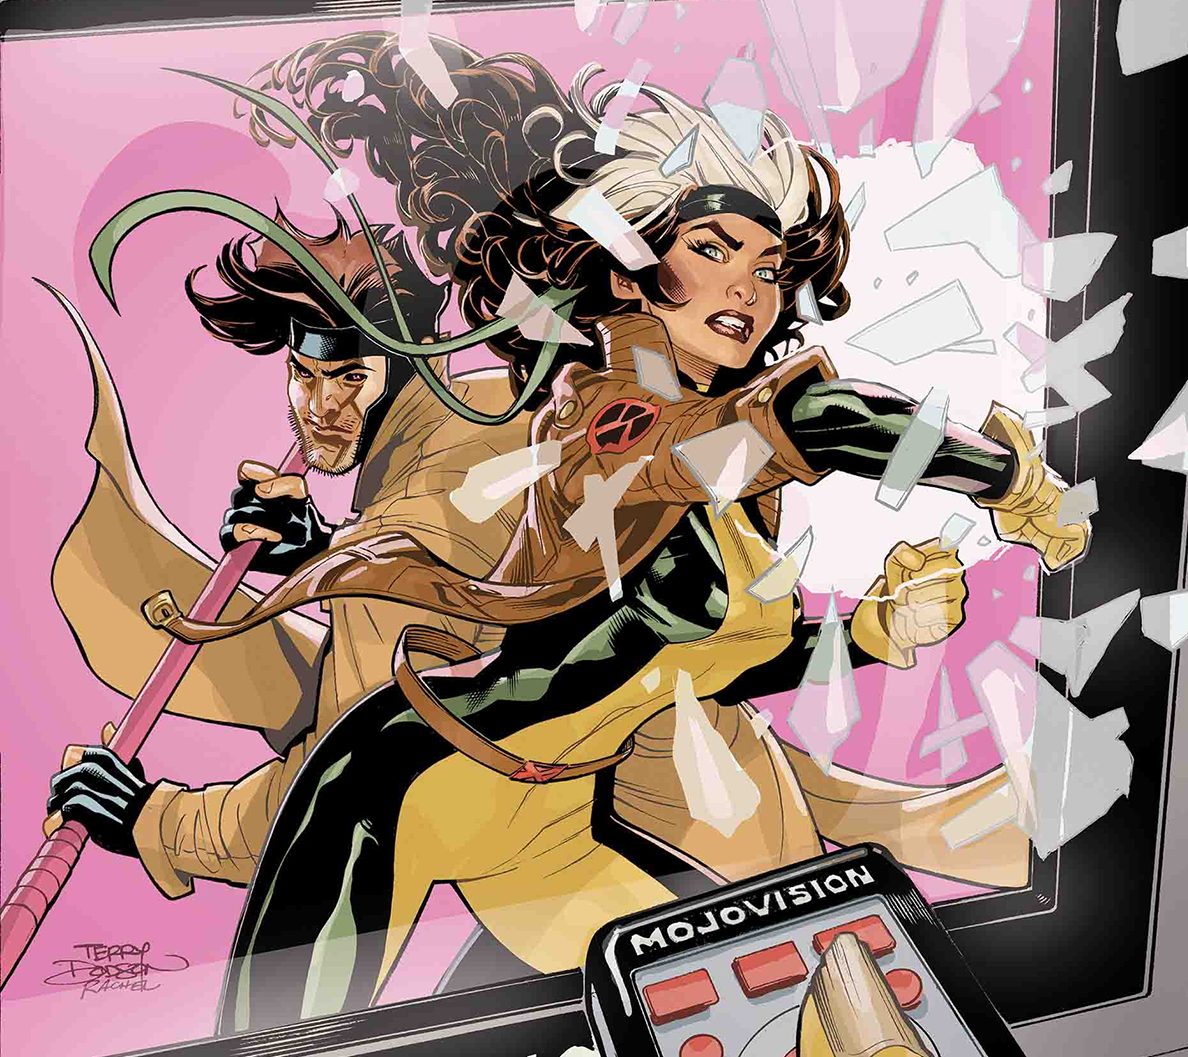 Mojo plays Cupid with Gambit and Rogue in 'Mr. and Mrs. X' #7